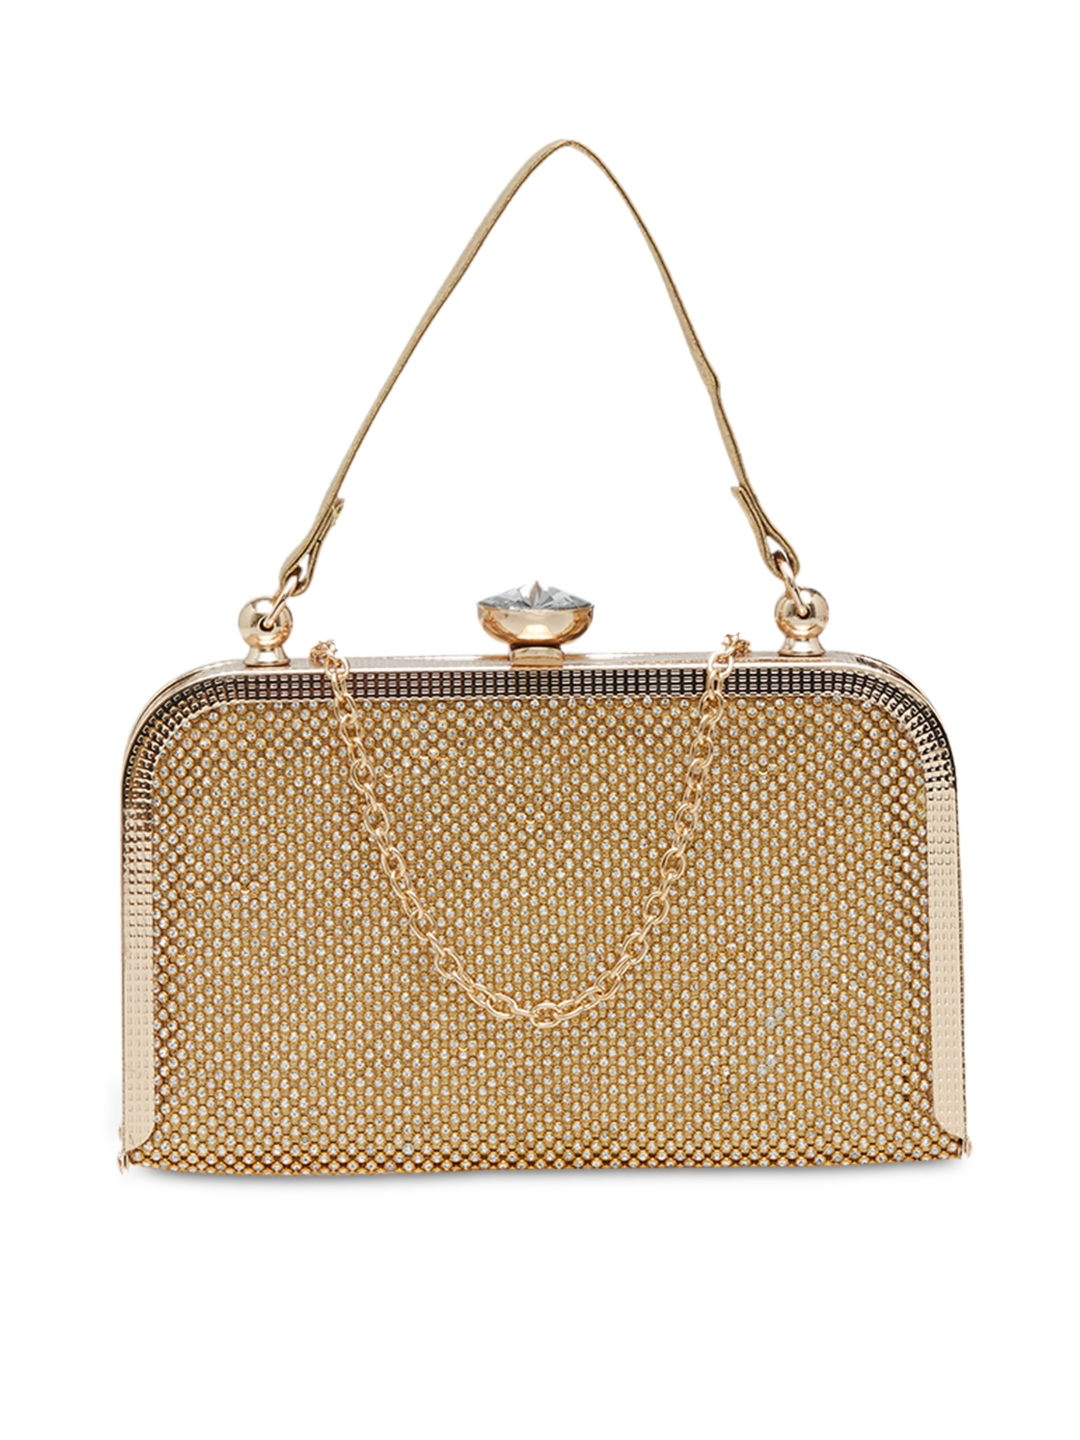 Buy ESBEDA Gold Toned Clutch - Clutches for Women 2166413 | Myntra